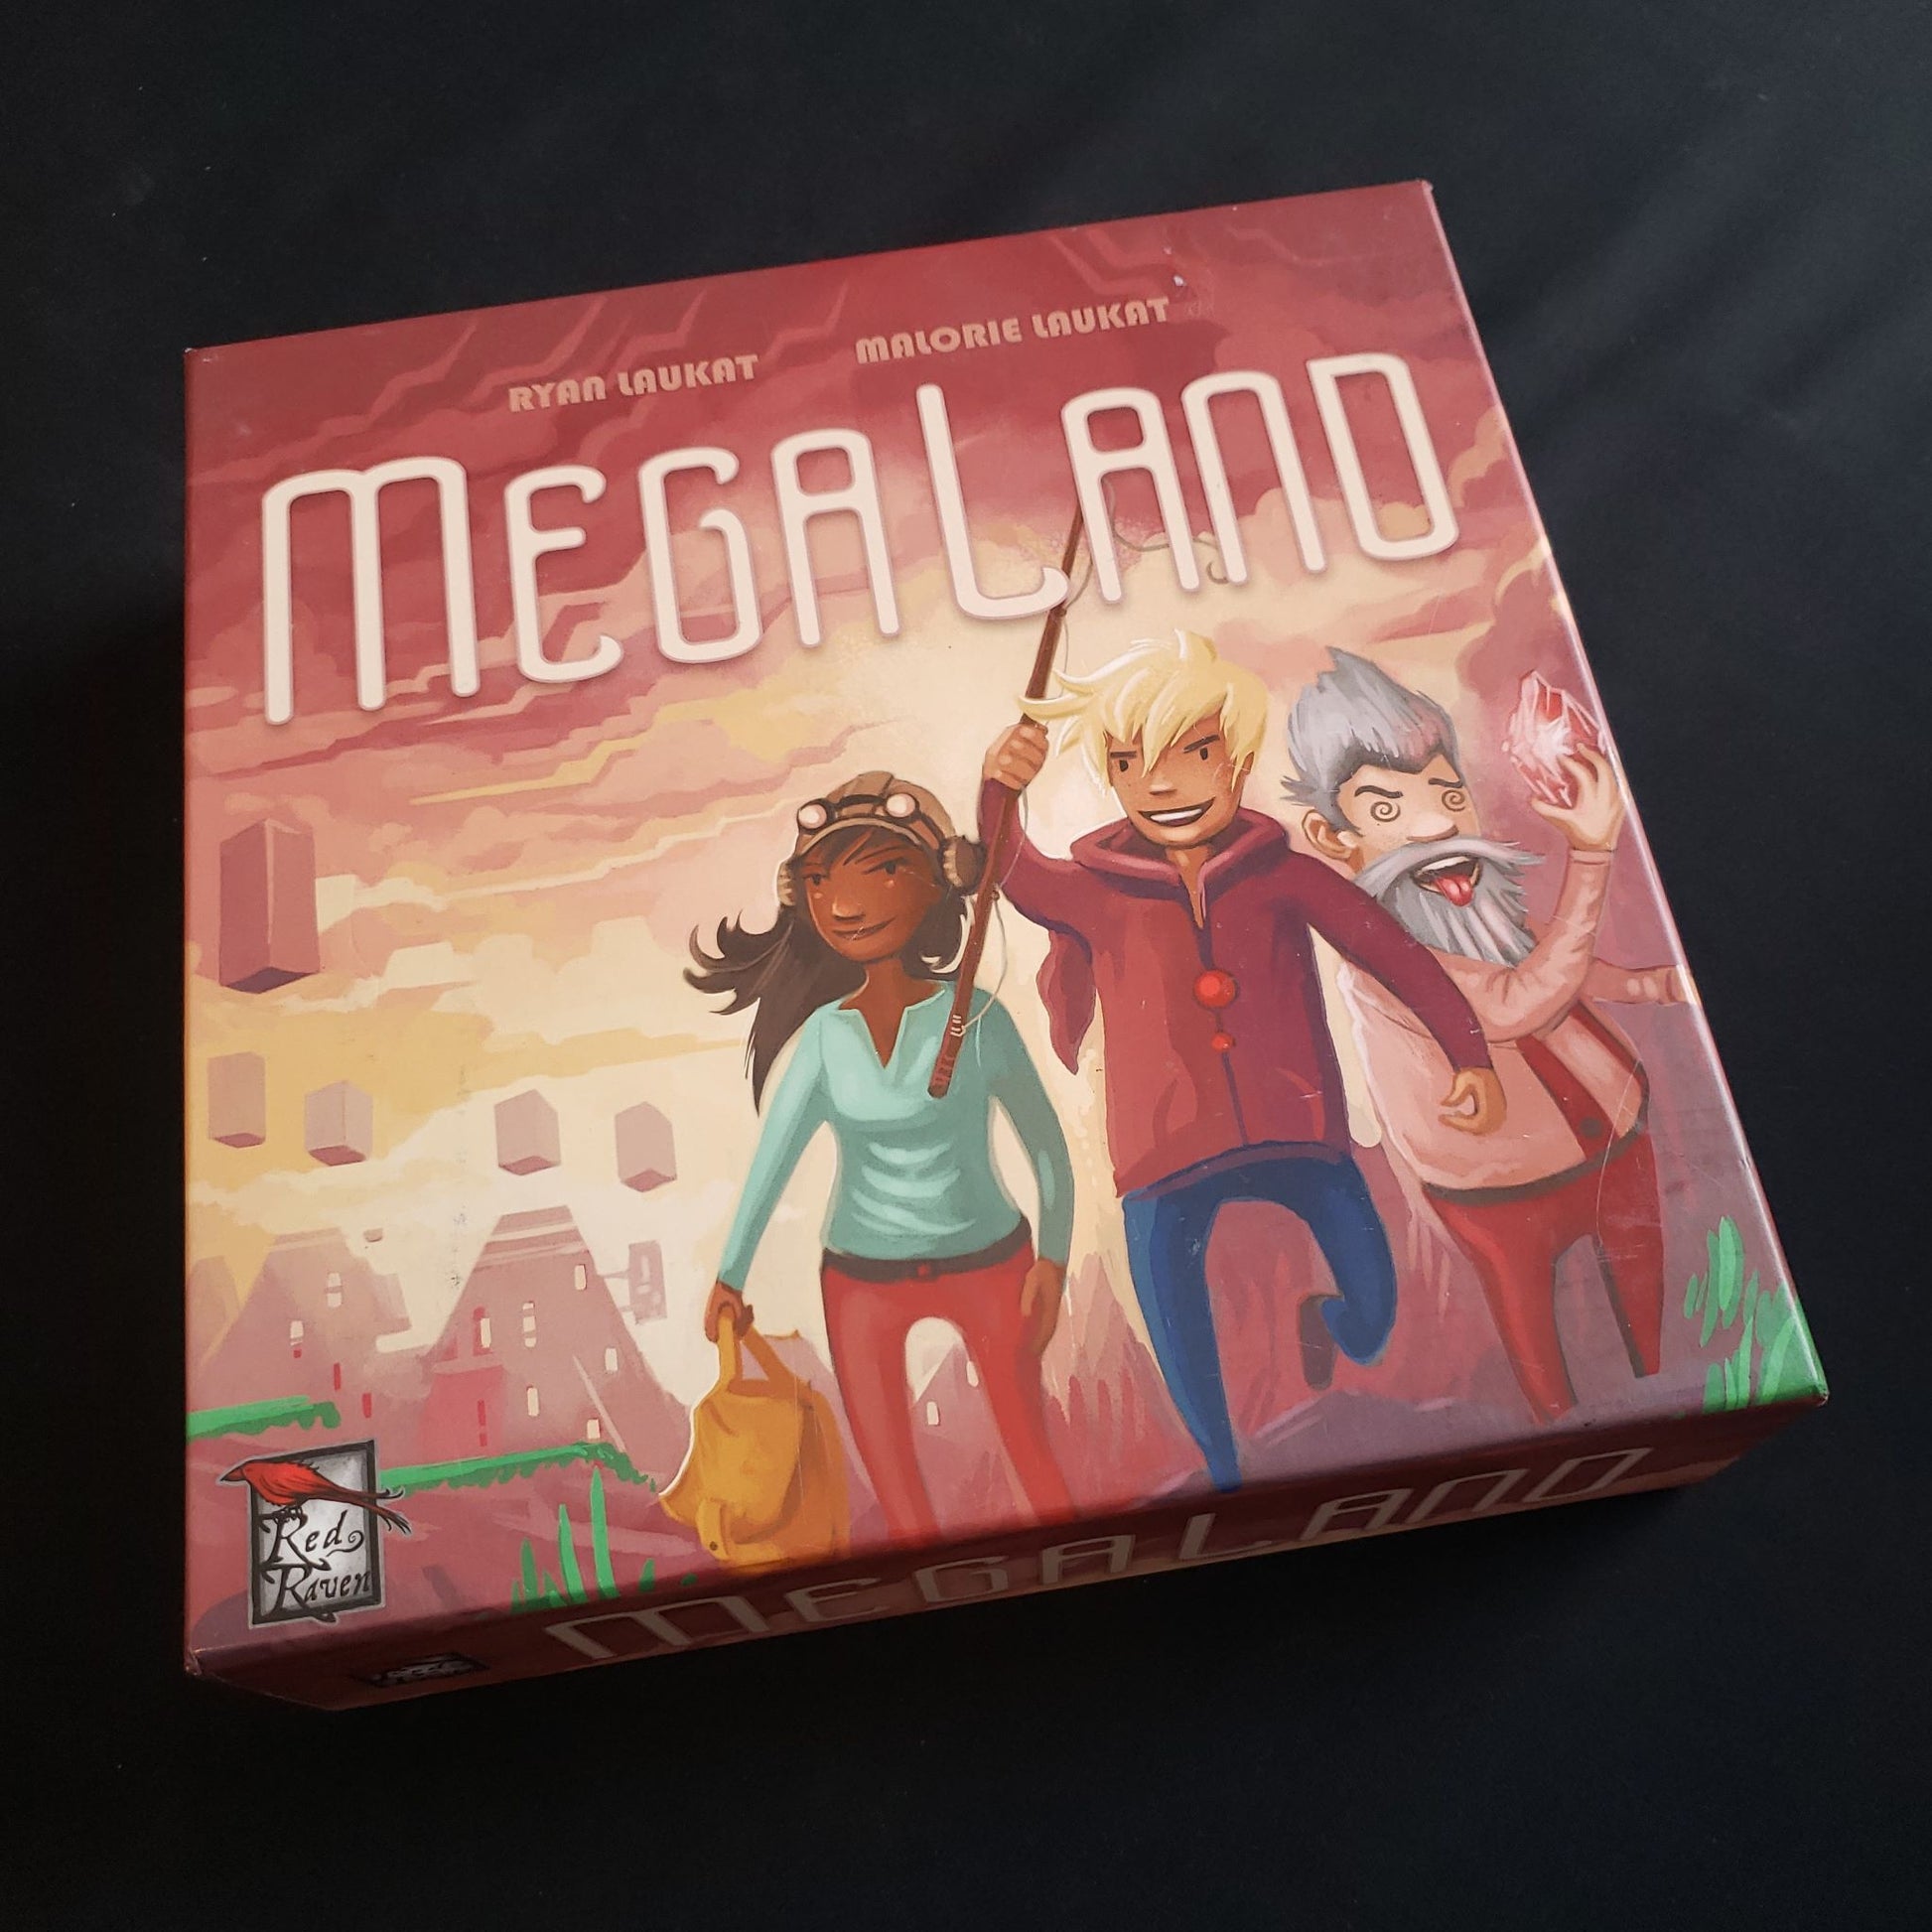 MegaLand board game - front cover of box